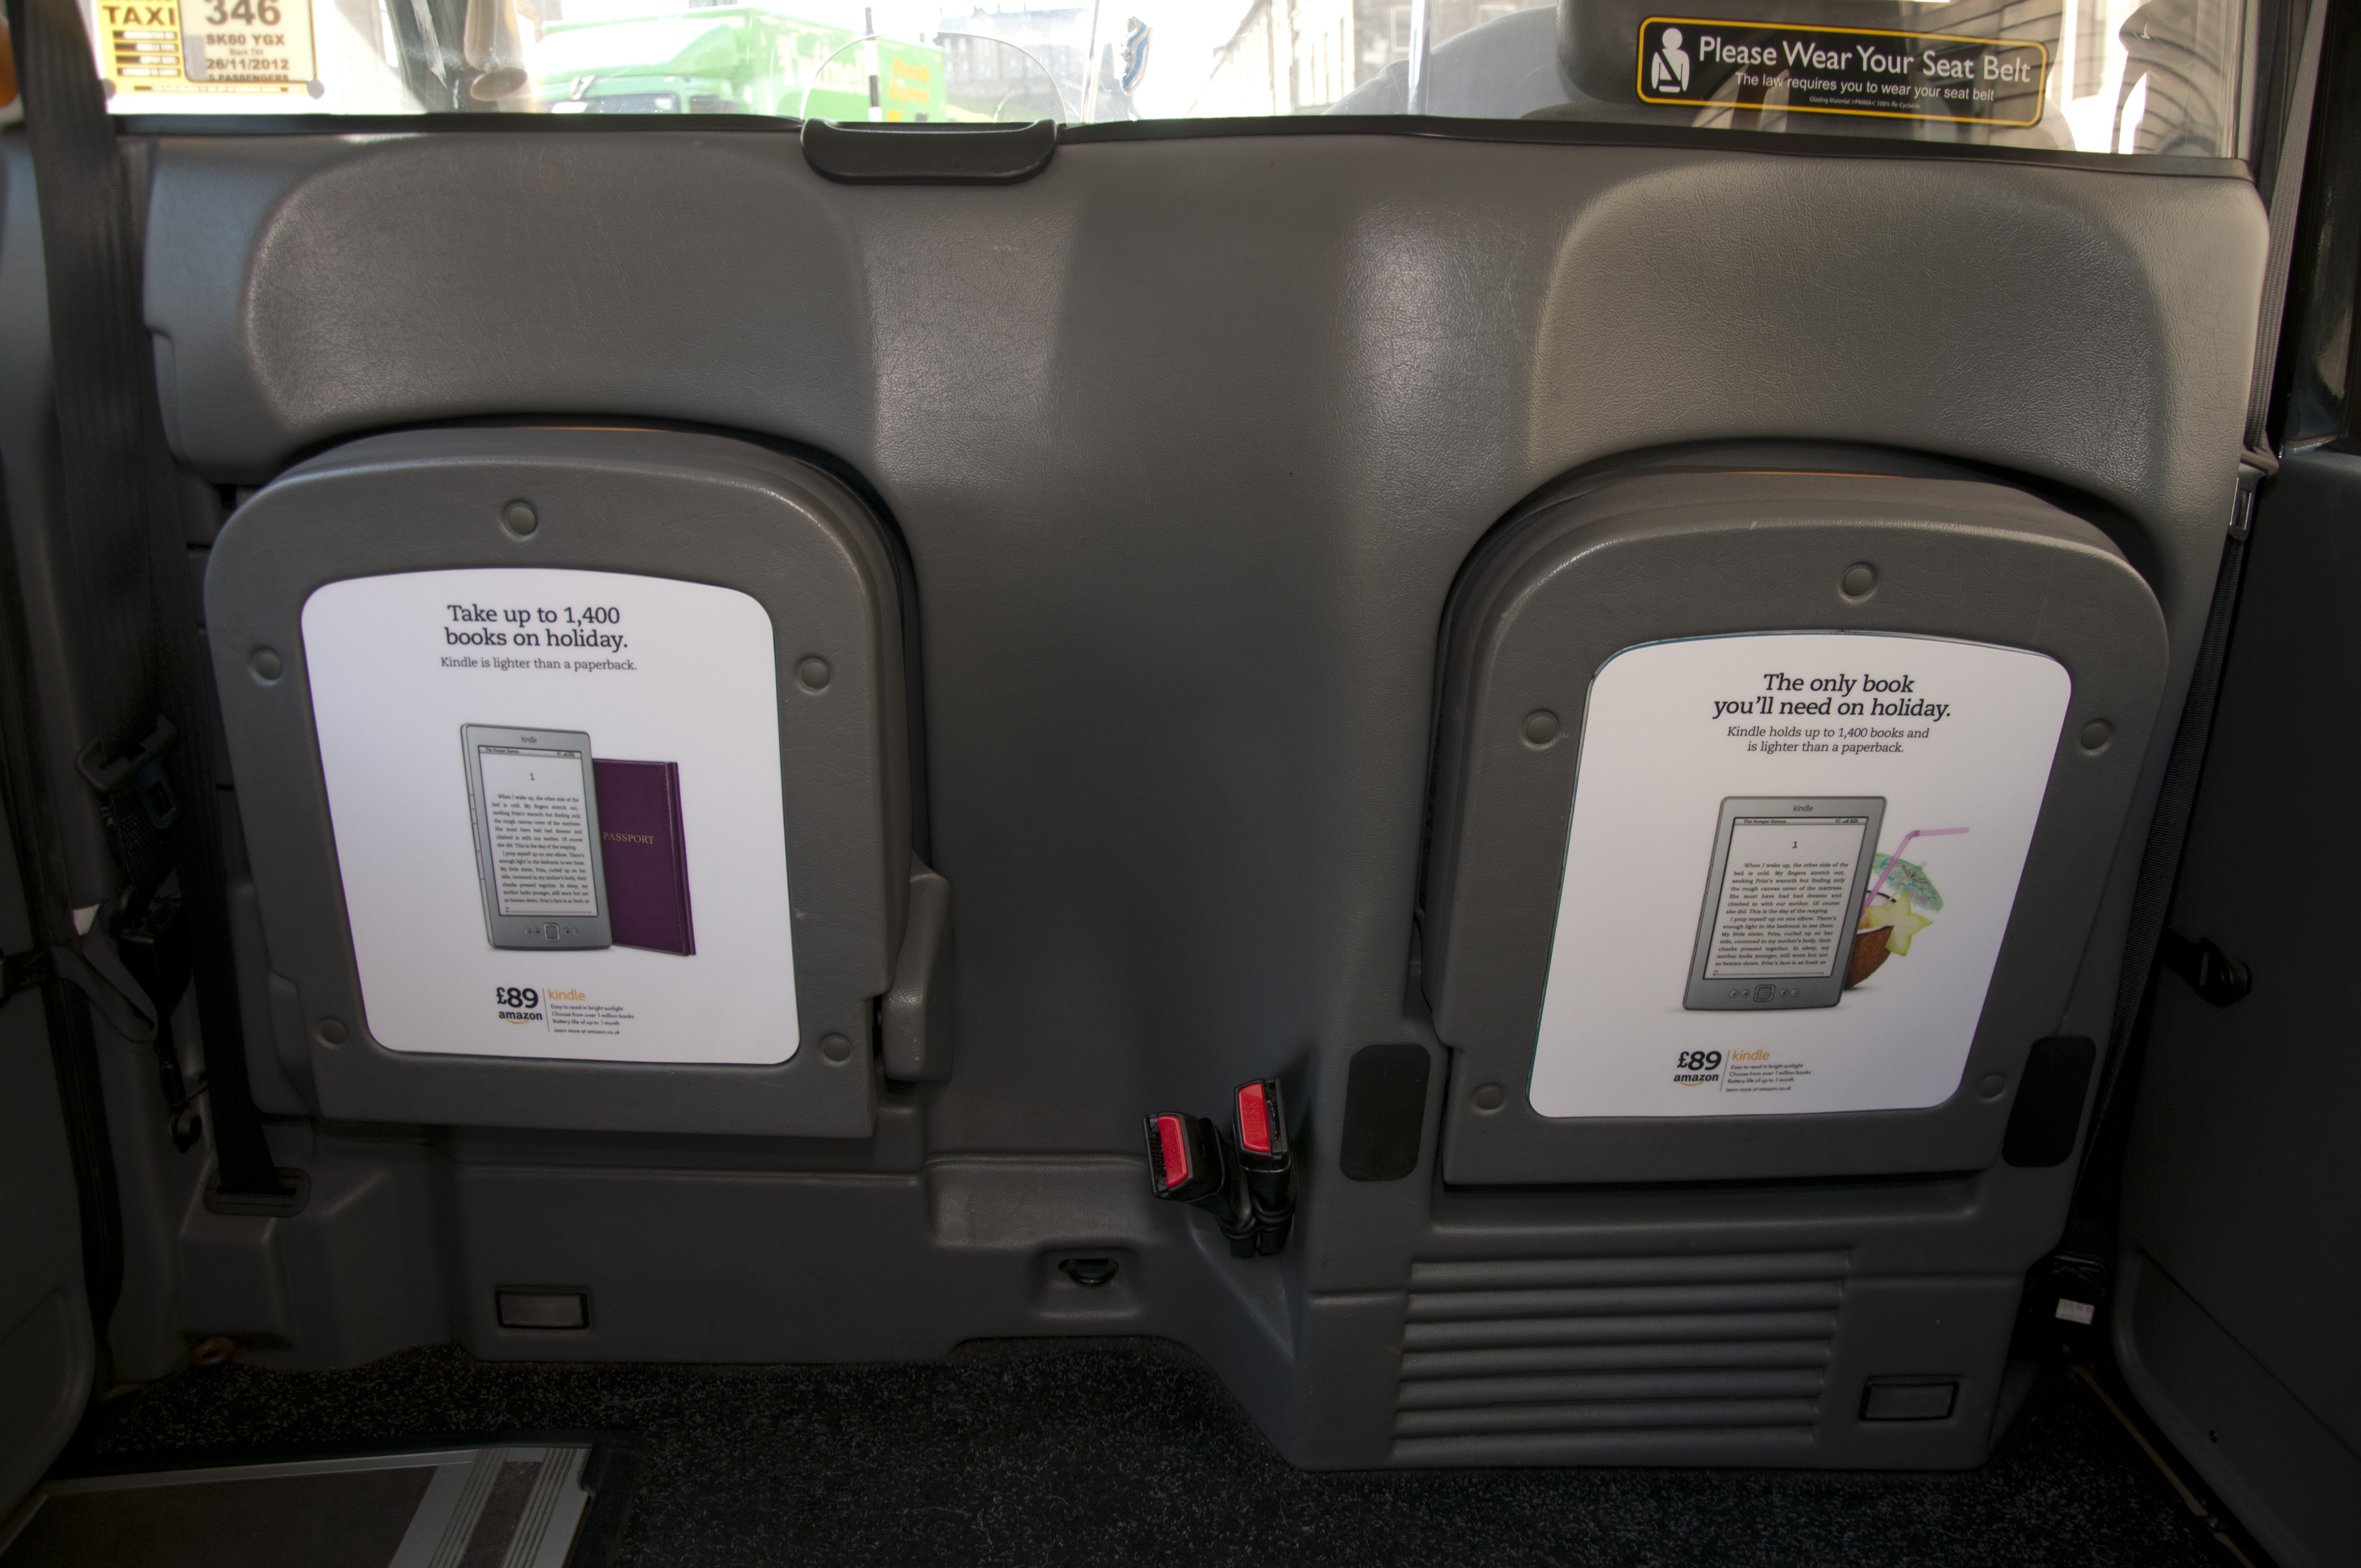 2012 Ubiquitous taxi advertising campaign for Amazon Kindle - The Only Book You'll Need On Holiday